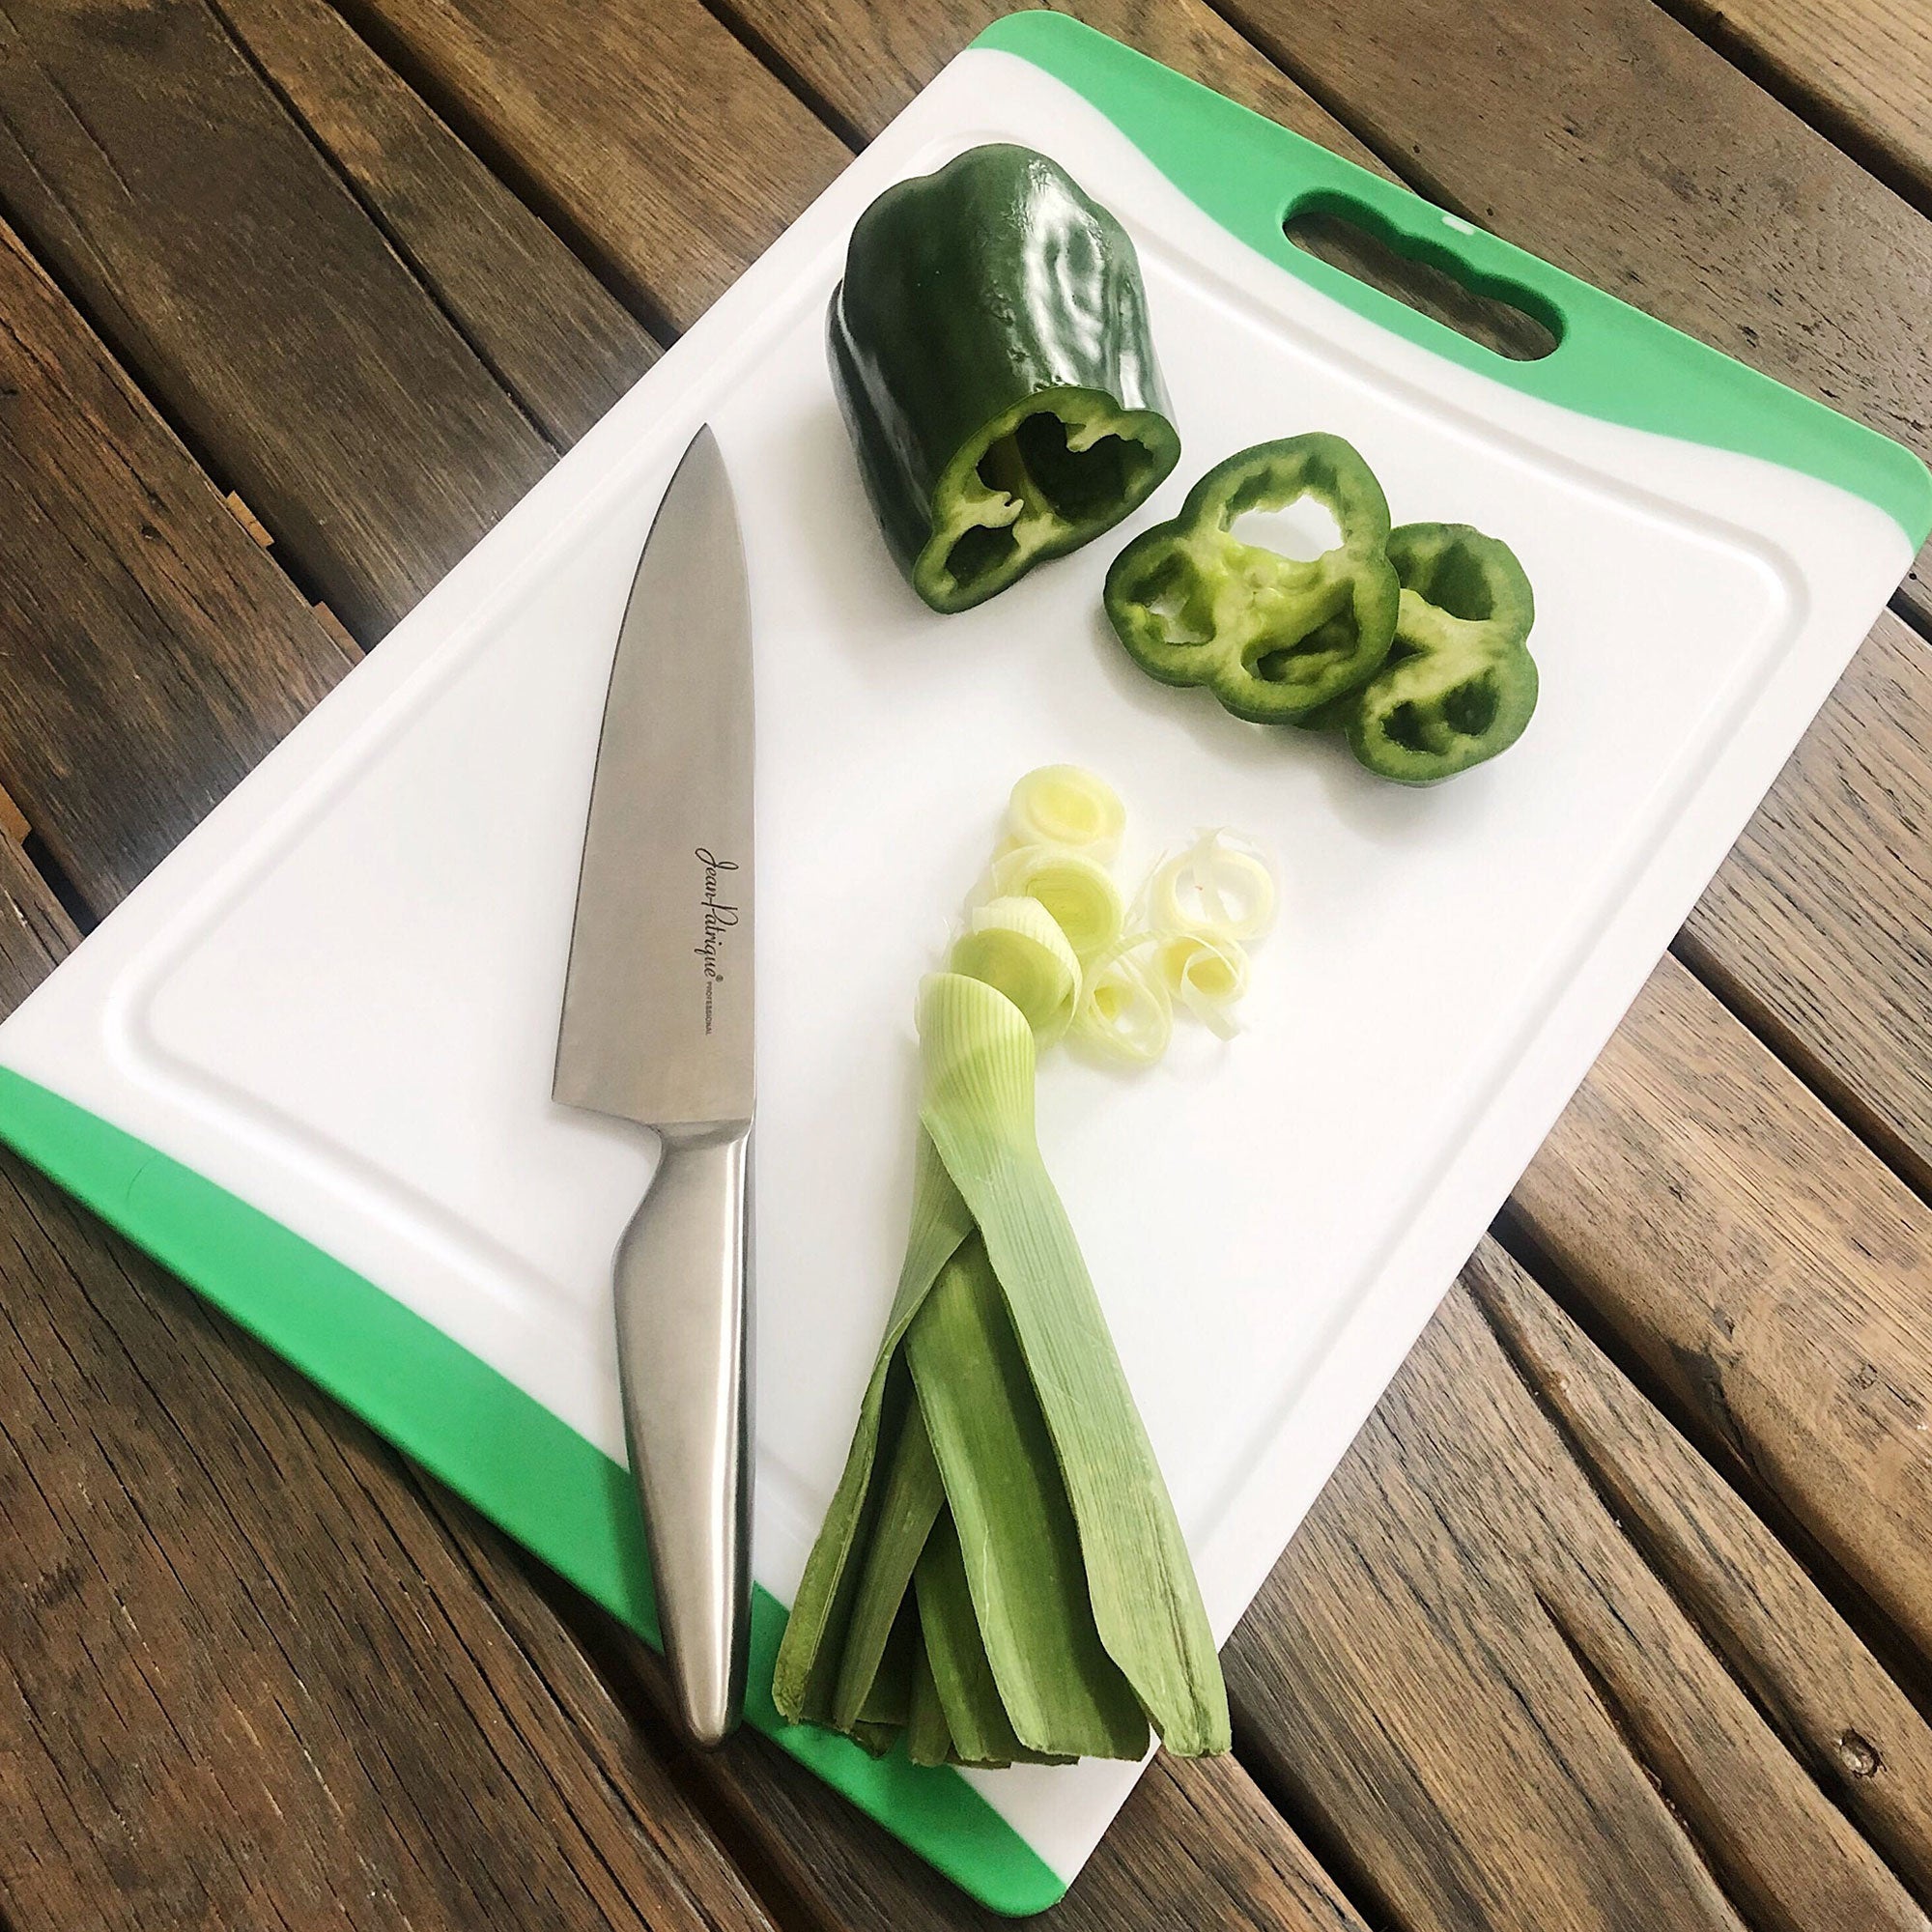 Jean Patrique Professional Cookware Large Plastic Chopping Board - Green, Dishwasher Safe, 16.93 x 11.81